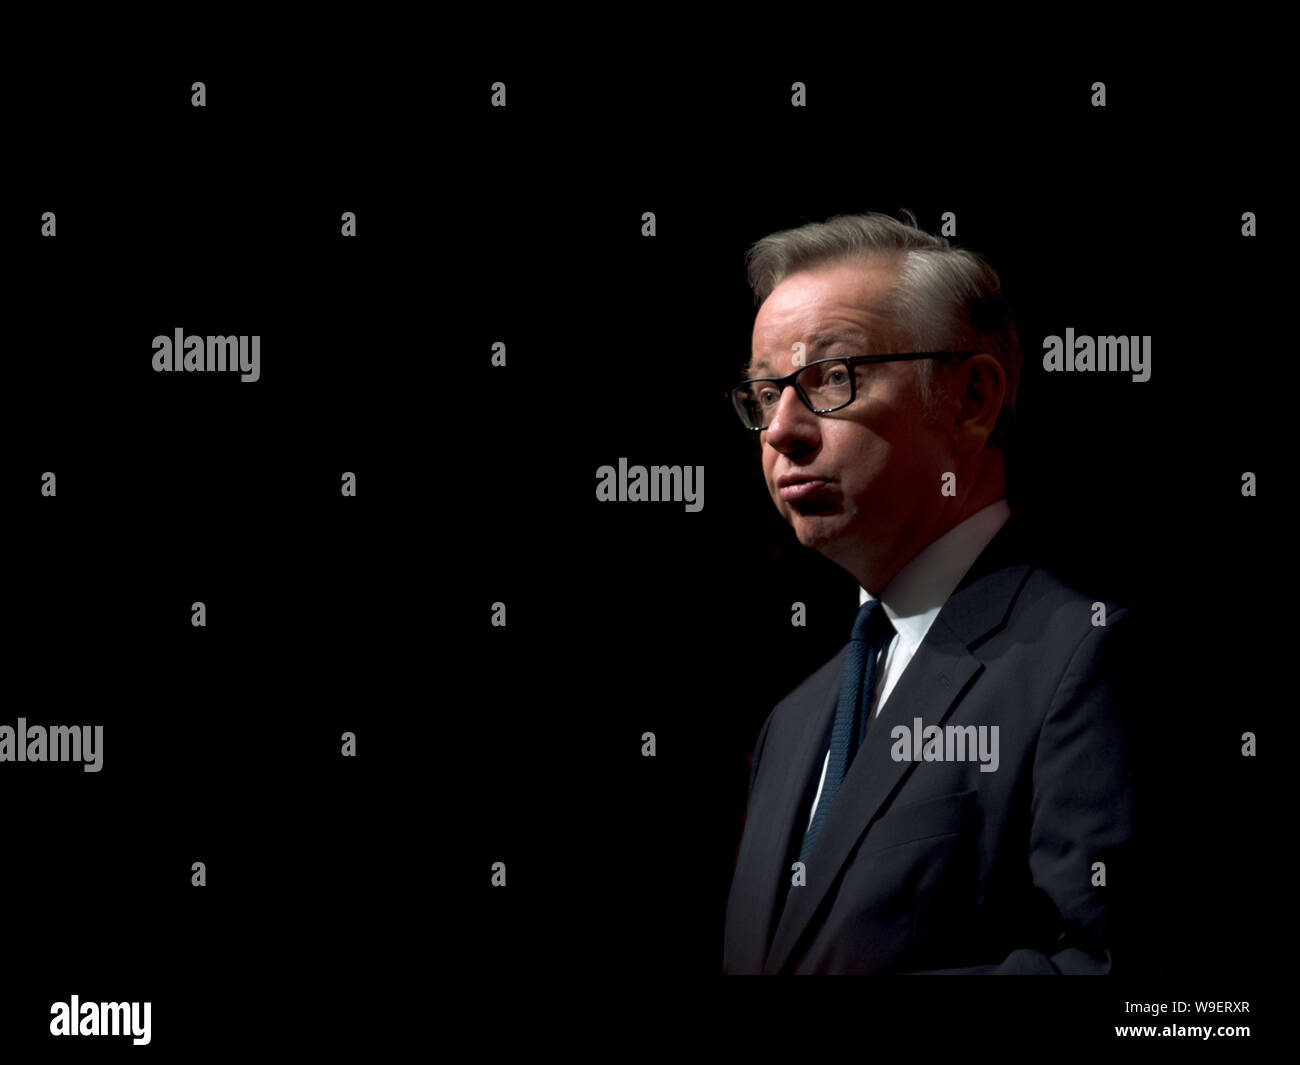 Conservative Cabinet member Micheal Gove portrait on simple black background with space for text Stock Photo